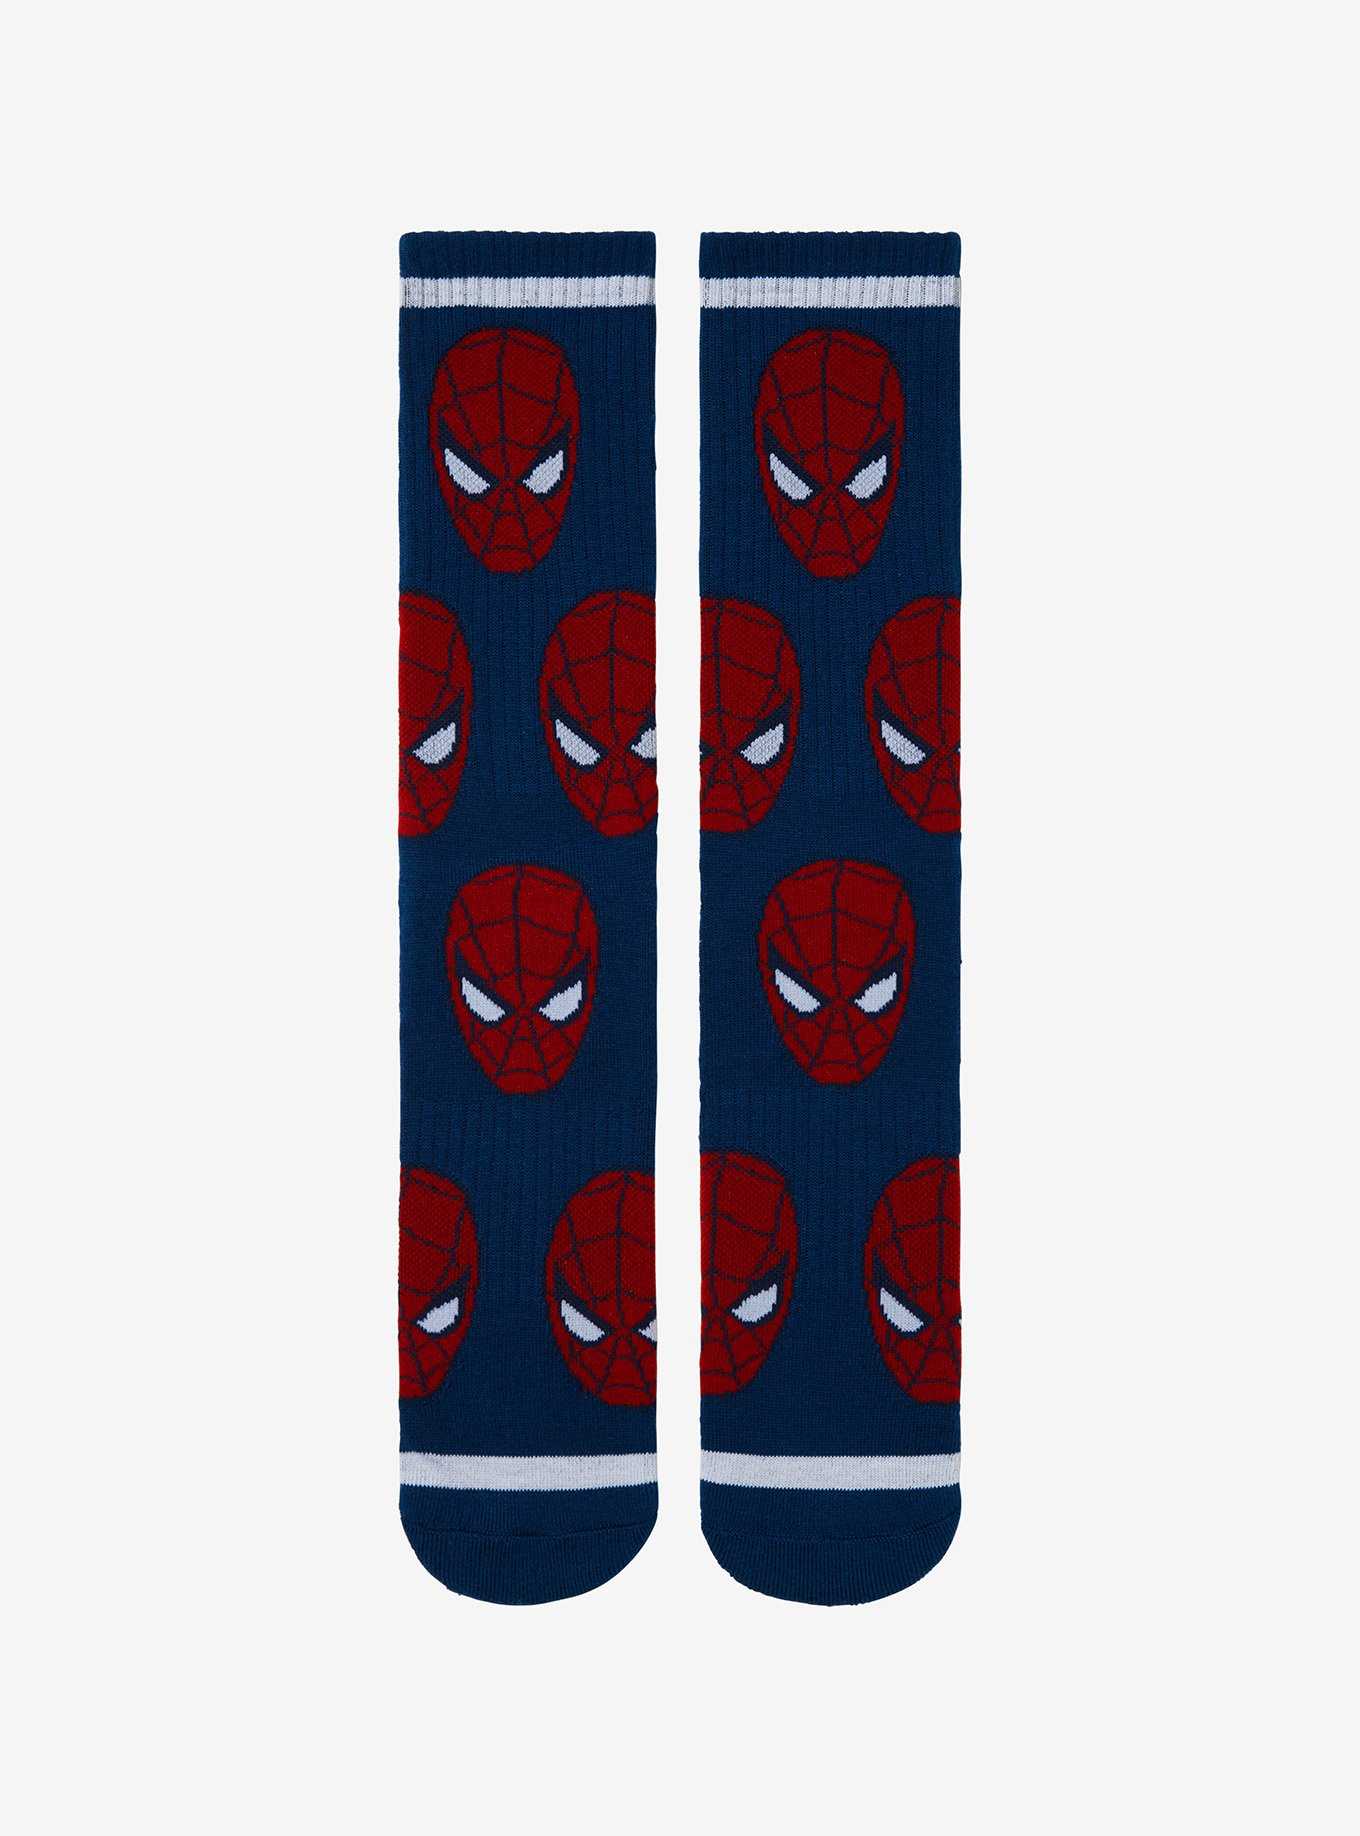 Marvel Spider-Man Allover Print Crew Socks - BoxLunch Exclusive, , hi-res